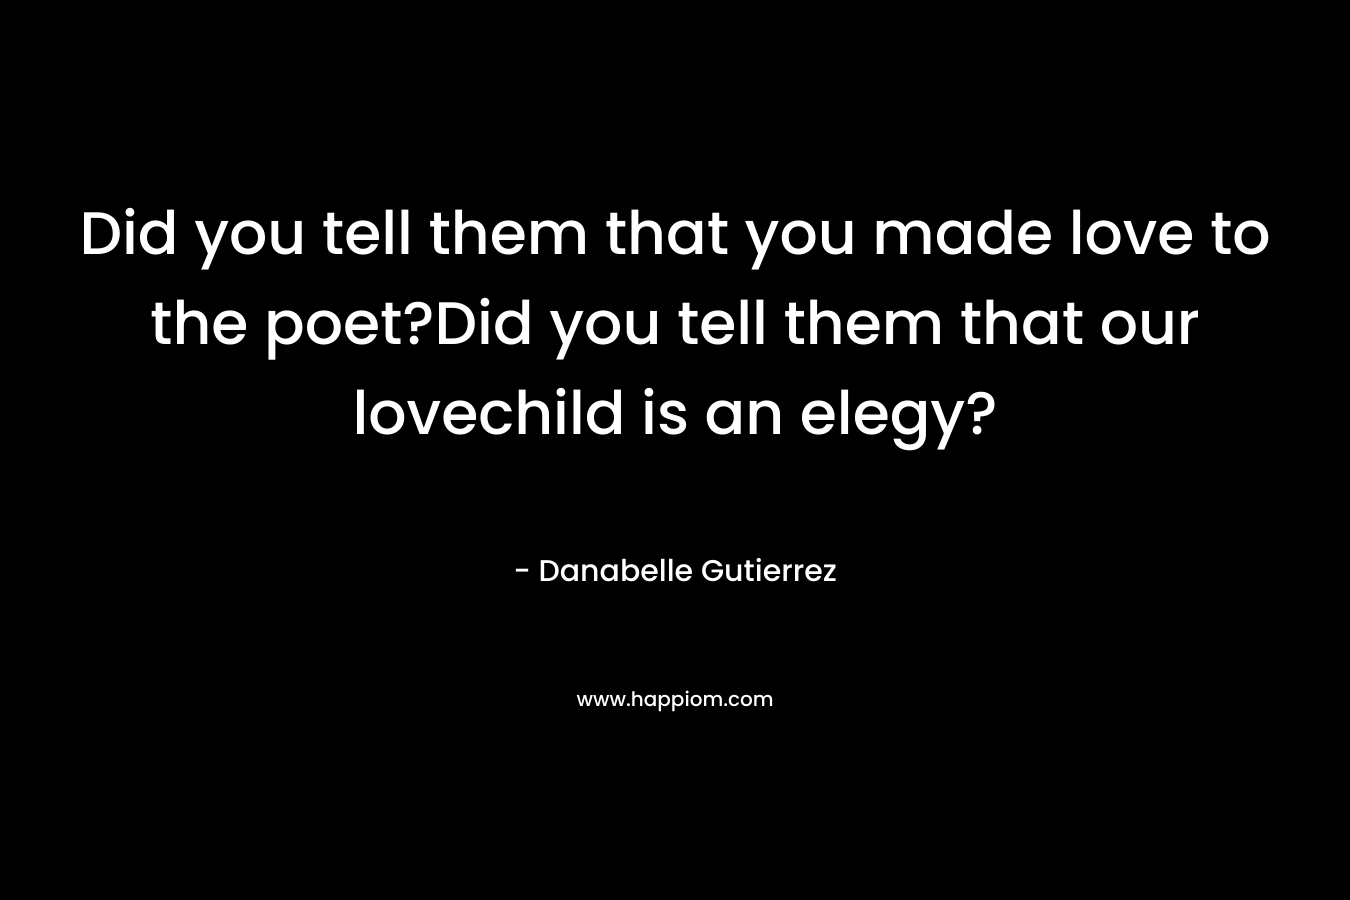 Did you tell them that you made love to the poet?Did you tell them that our lovechild is an elegy?